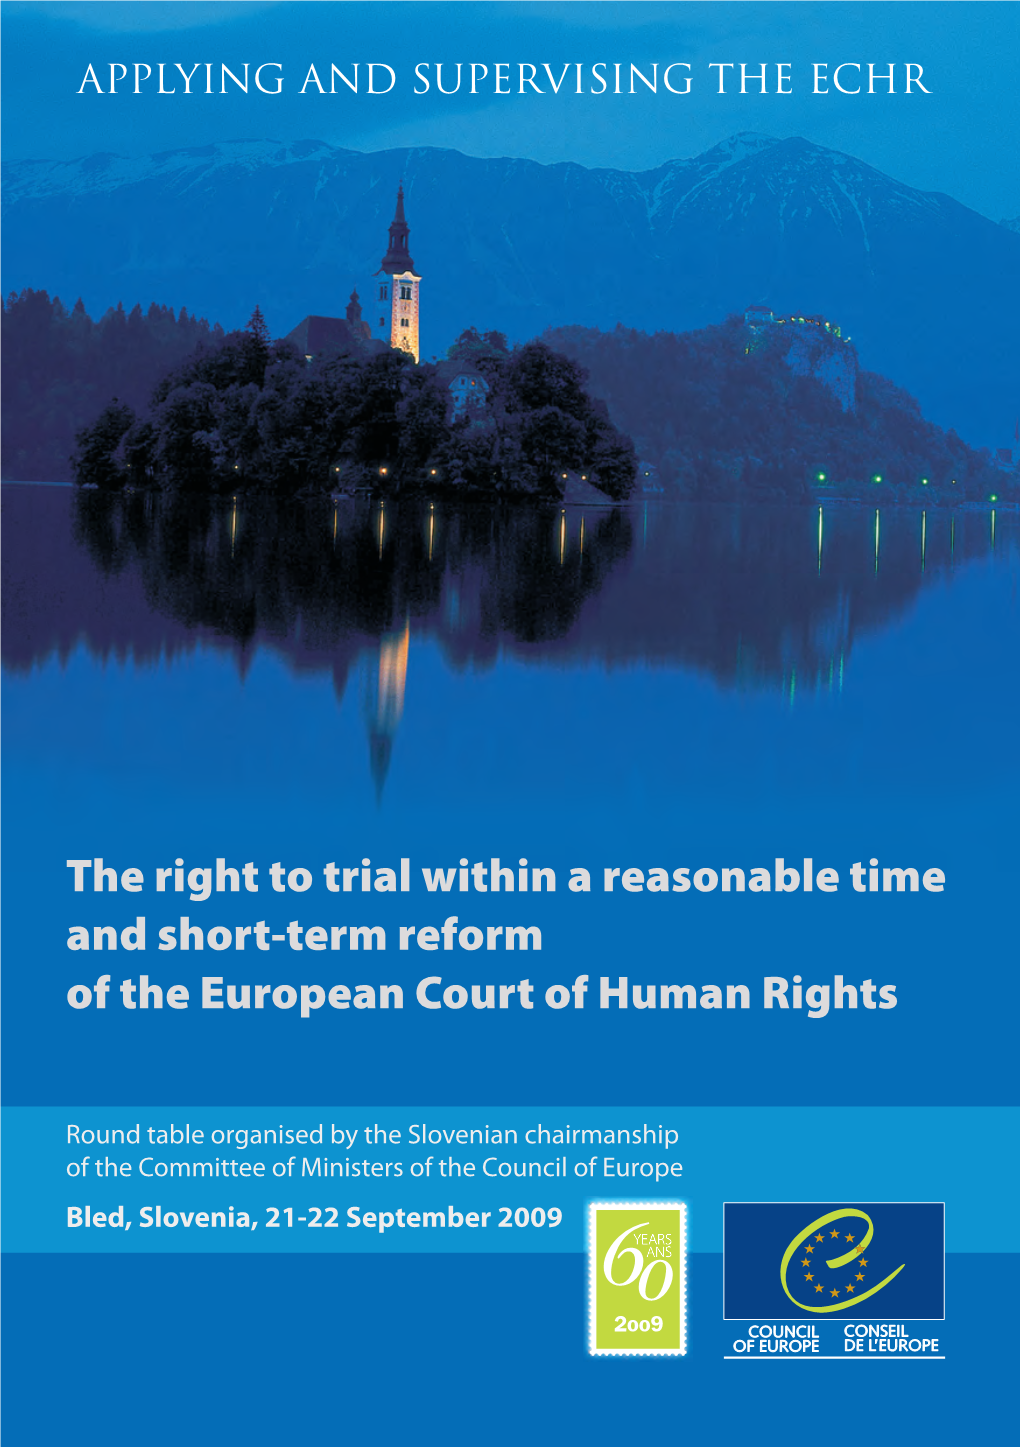 The Right to Trial Within a Reasonable Time and Short-Term Reform of the European Court of Human Rights